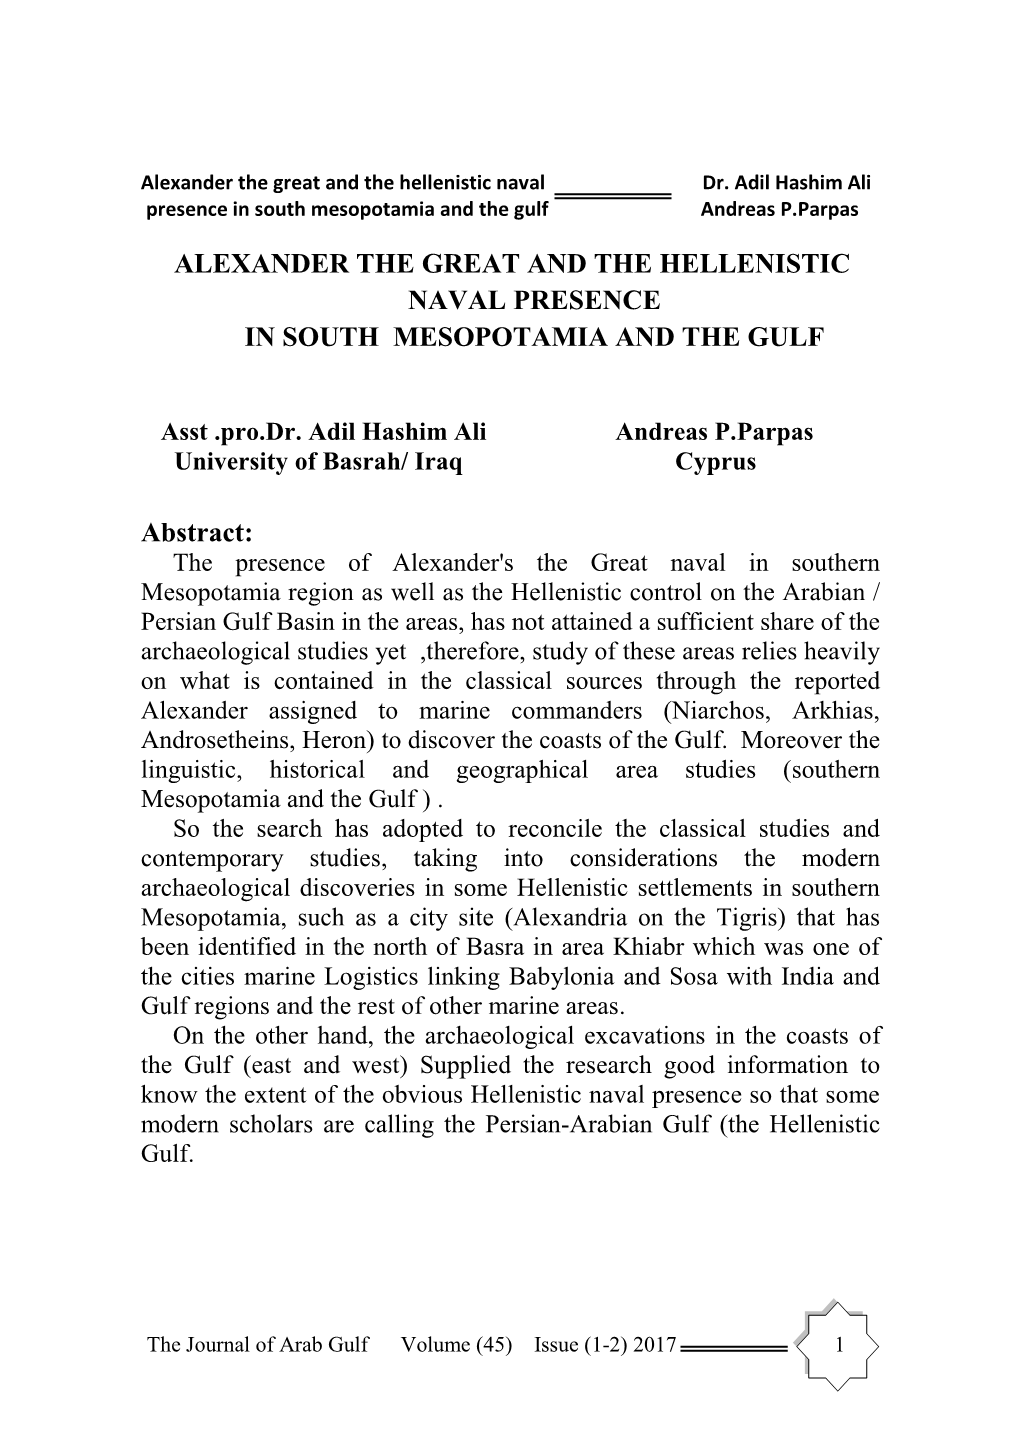 Alexander the Great and the Hellenistic Naval Presence in South Mesopotamia and the Gulf